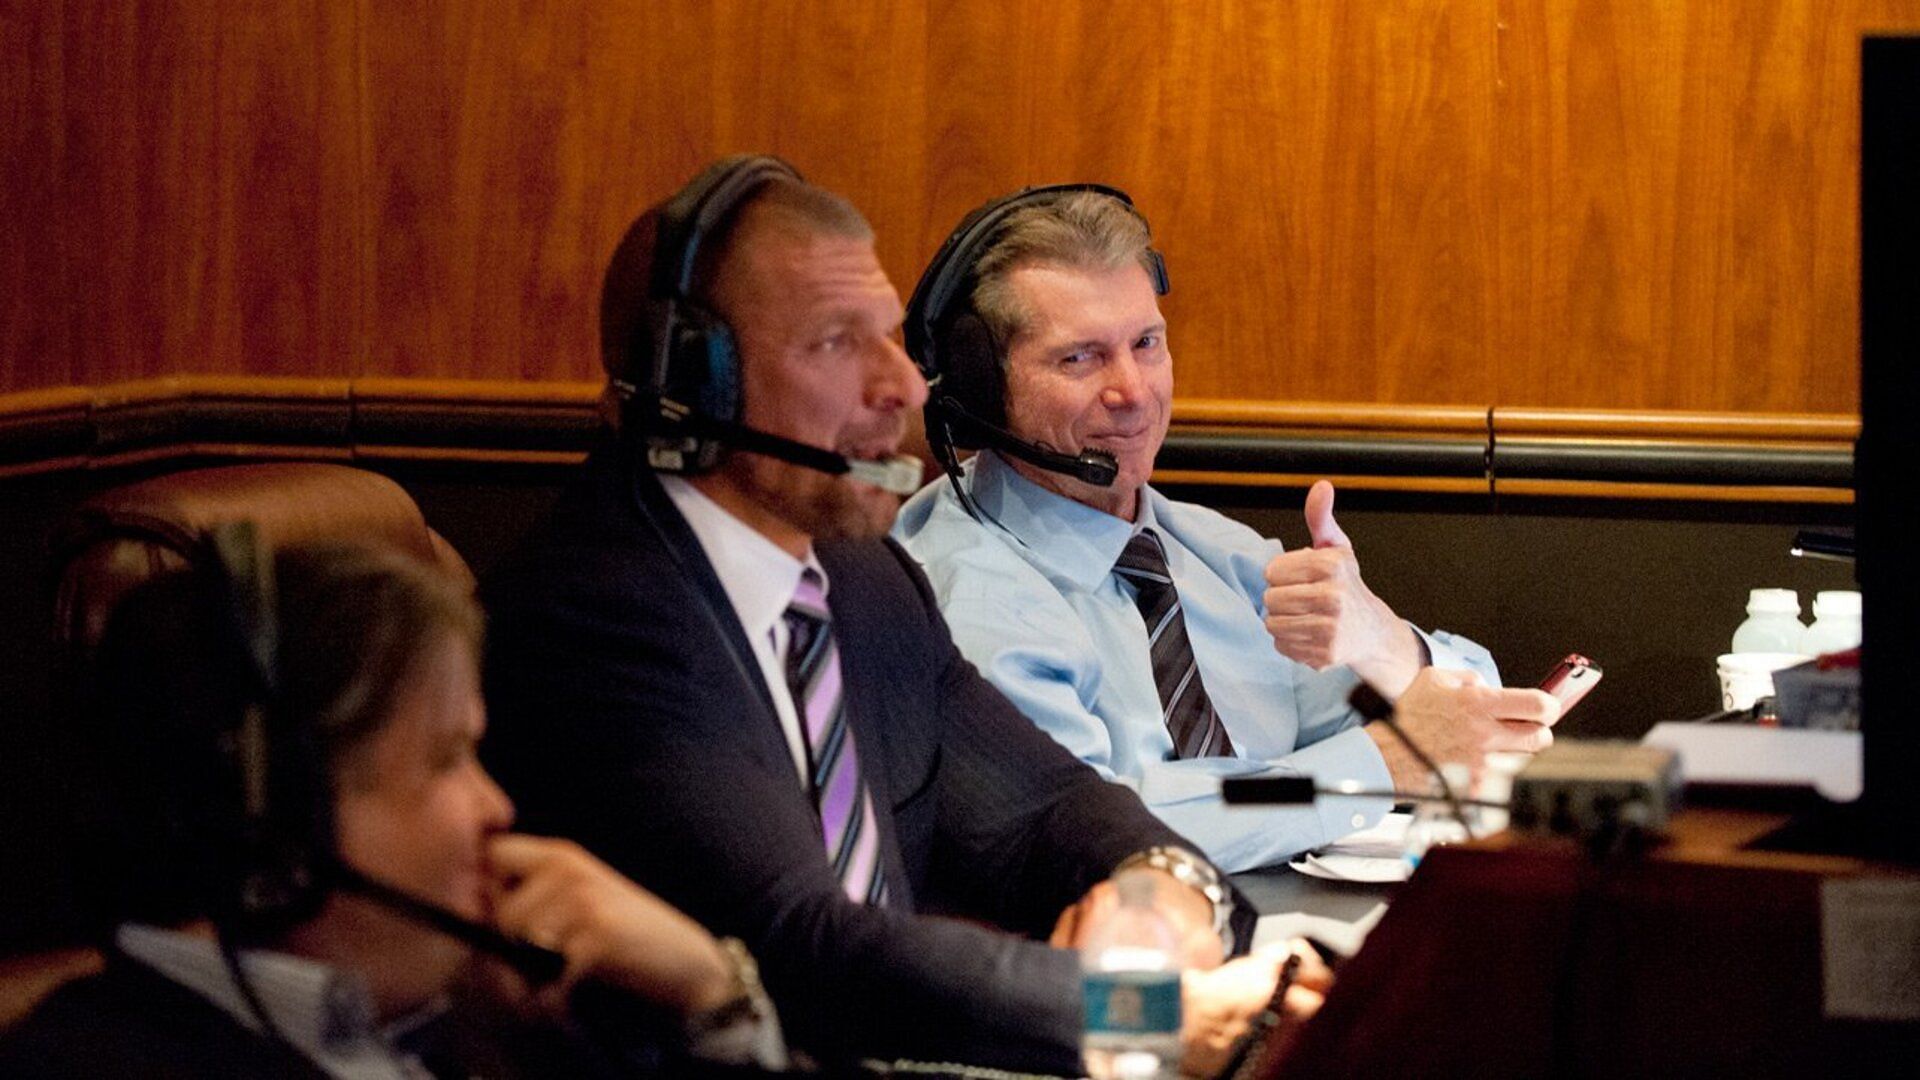 Vince McMahon gives a thumbs up next to Triple H while working Gorilla Position at WWE RAW